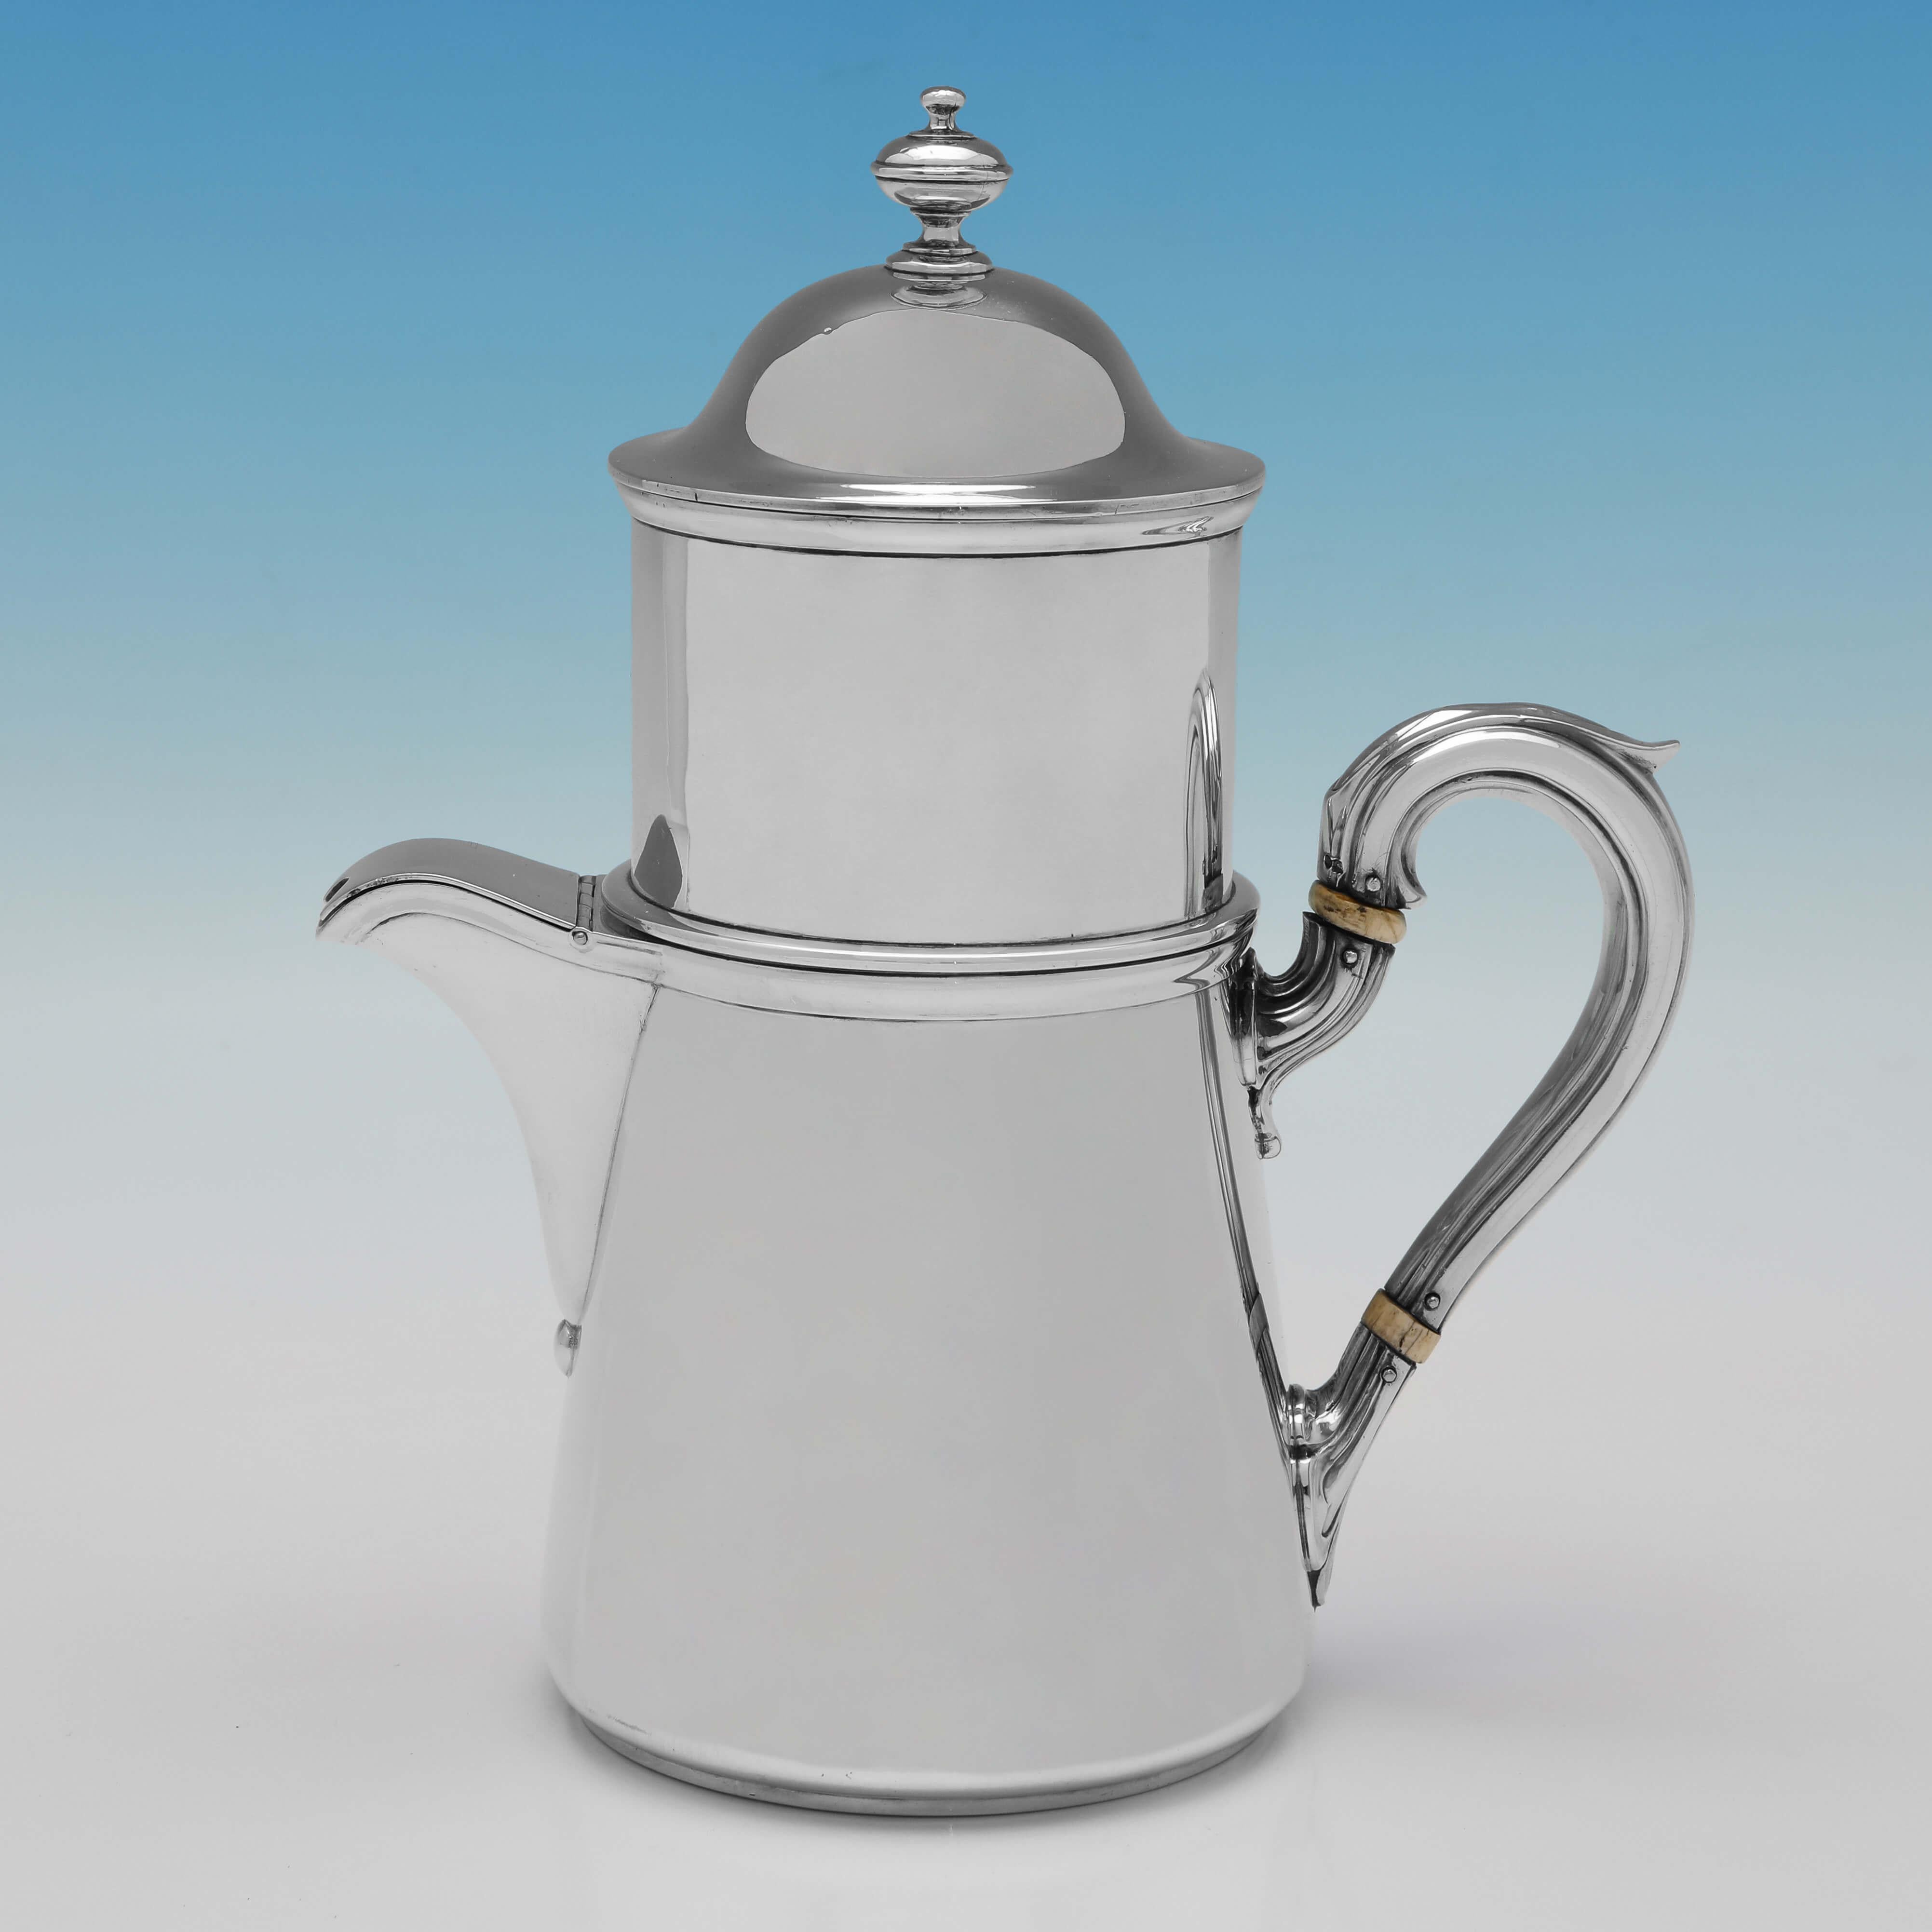 Hallmarked in London in 1862 by Alfred Ivory, this rare, Victorian Antique Sterling Silver Cafetiere, is plain in style, with a scroll handle, and an engraved crest to one side. 

The cafetiere measures 8.25